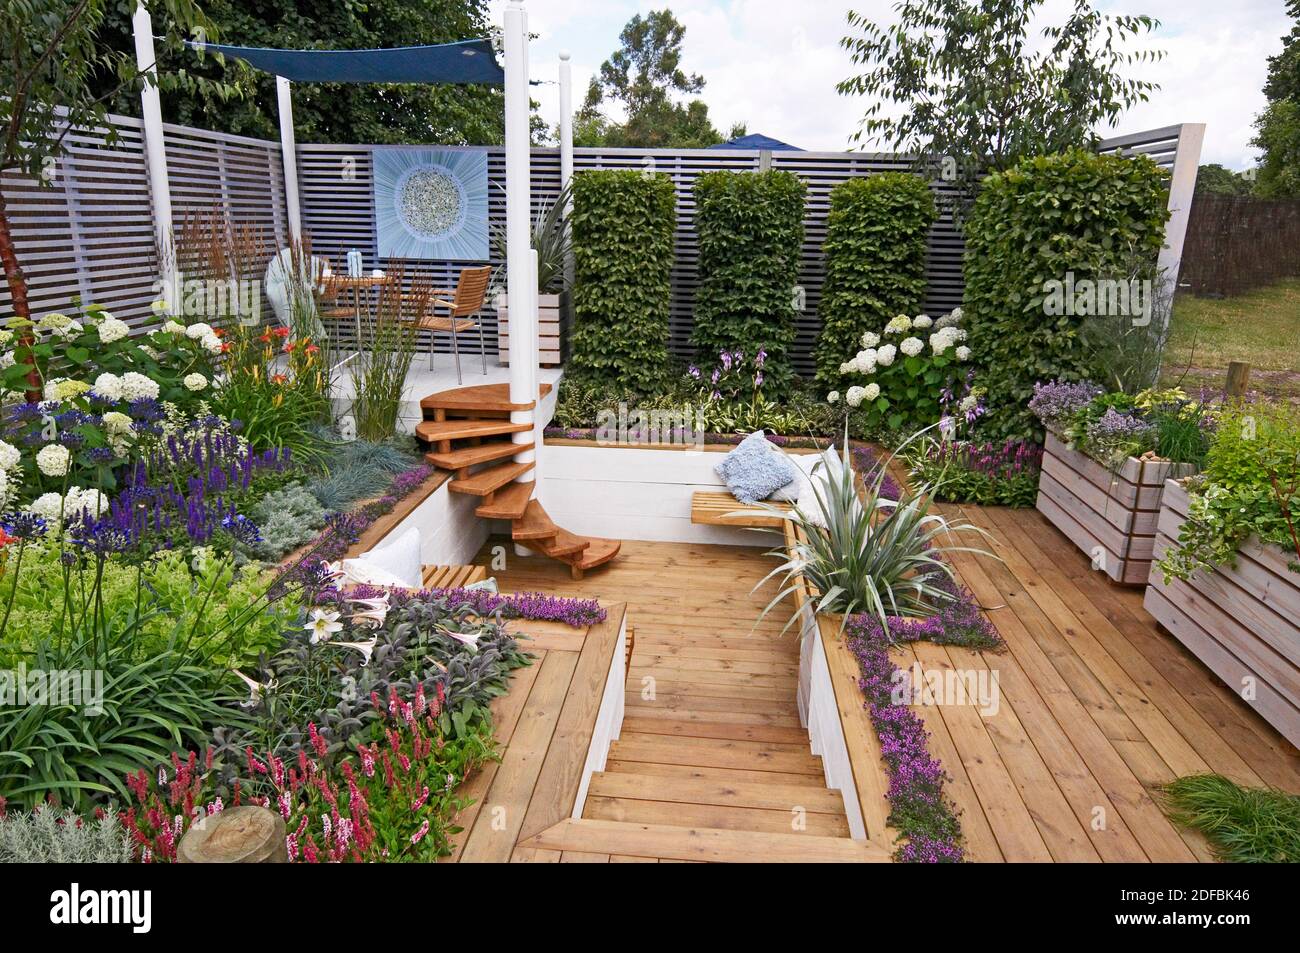 A COLOURFUL SHOW GARDEN WITH SEATING AND DECKING FOR AN URBAN GARDEN. Planting around the raised covered seating area with decking  and a sunken area Stock Photo